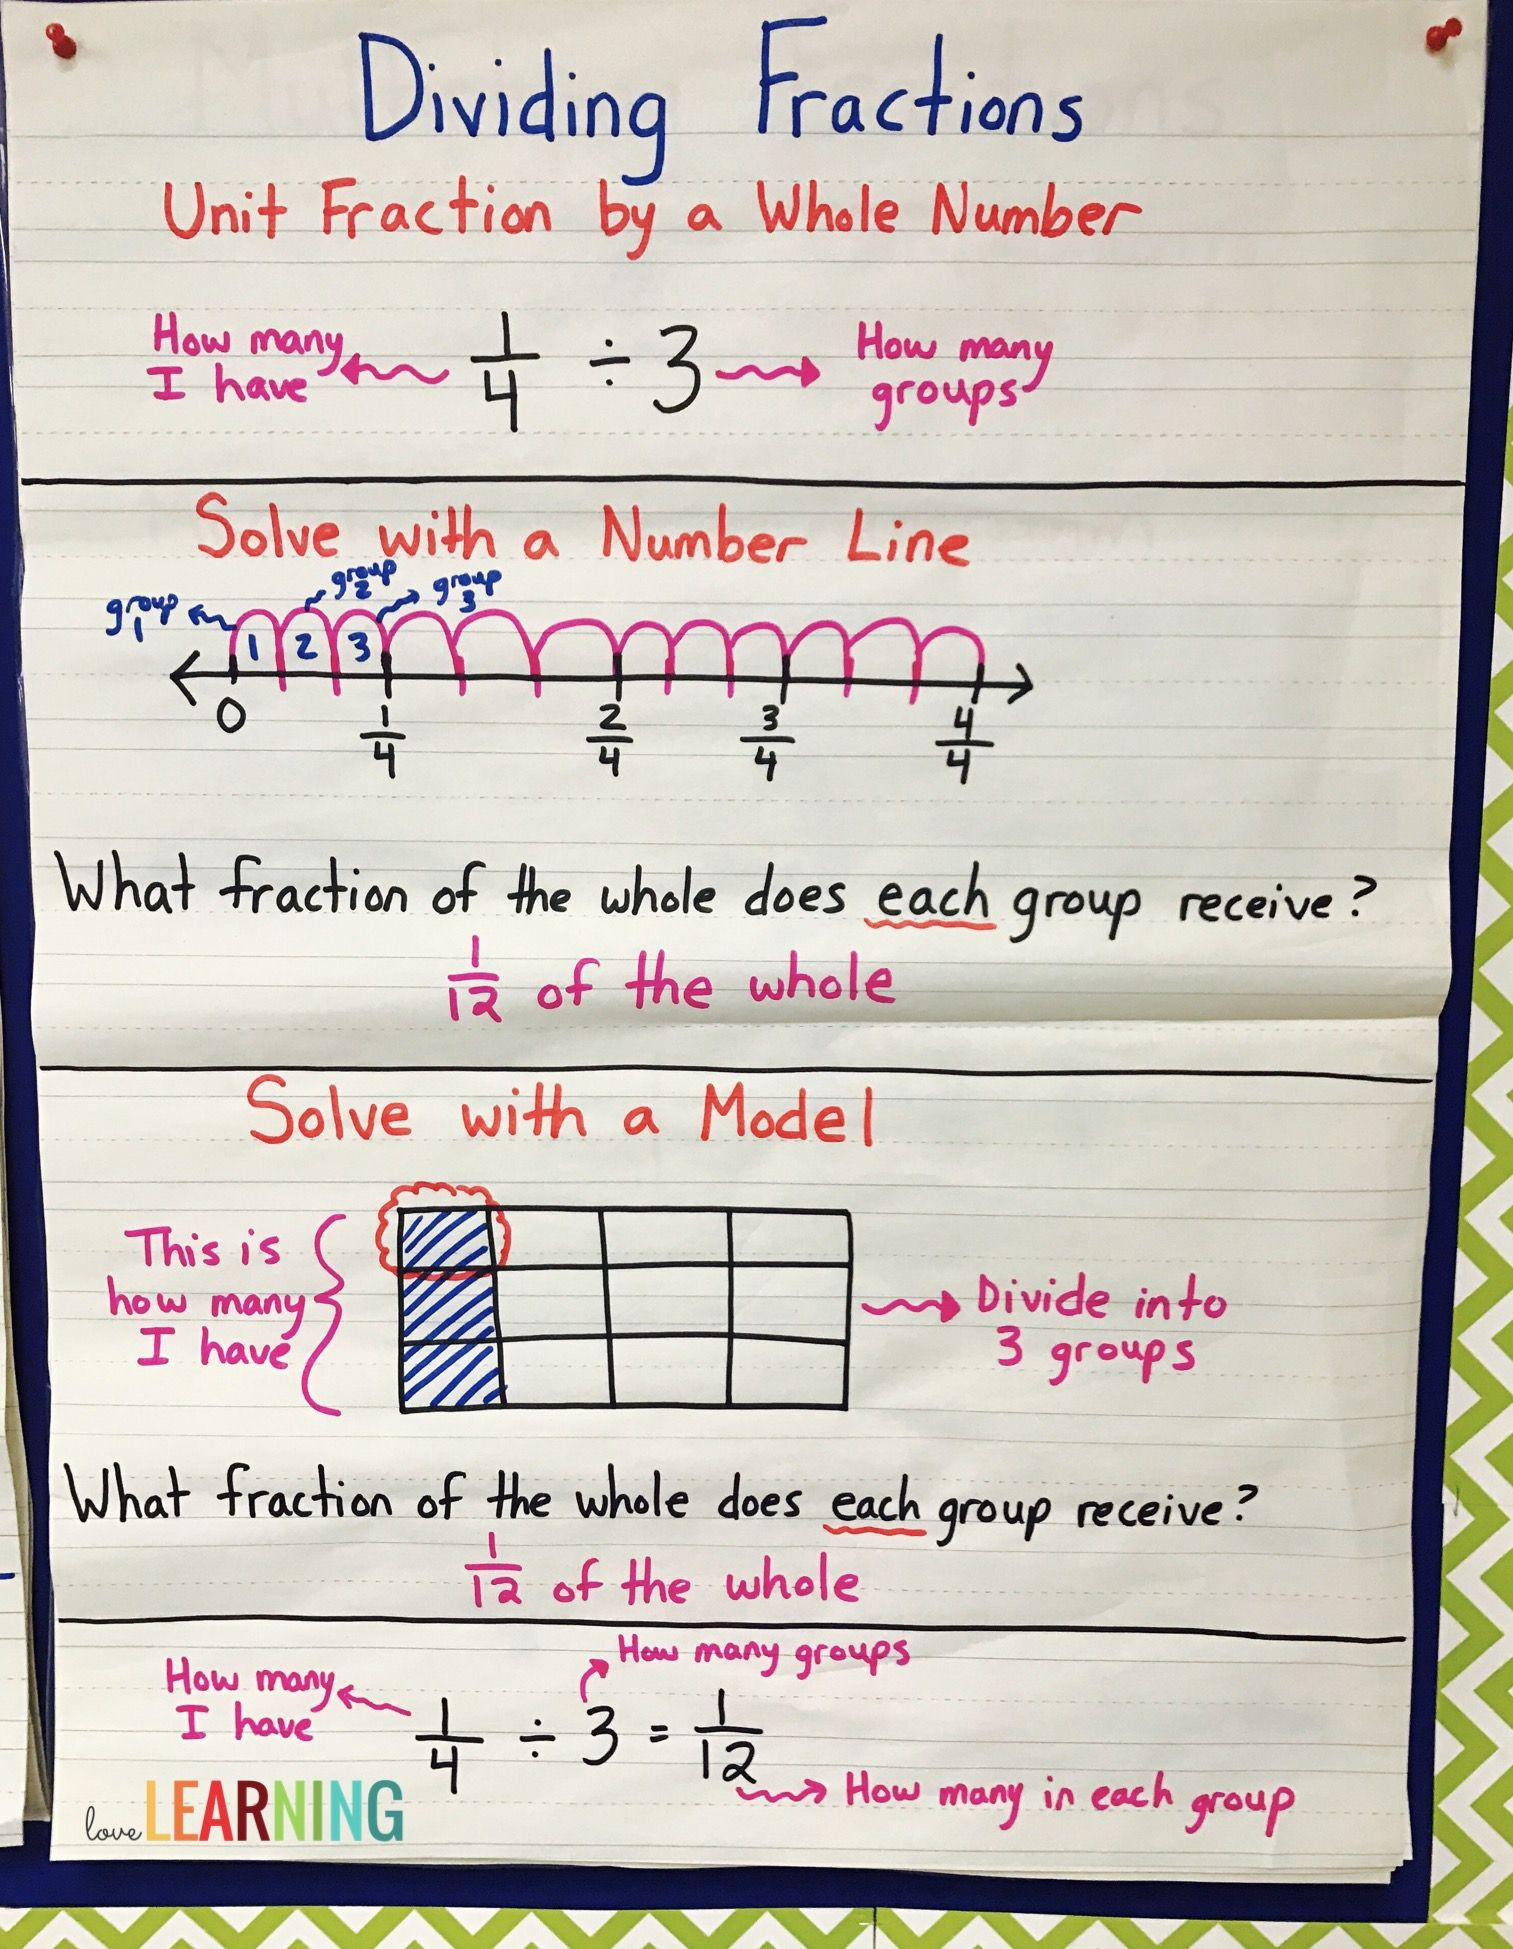 Dividing Fractions Using Models Worksheet Divide Unit Fractions and whole Numbers